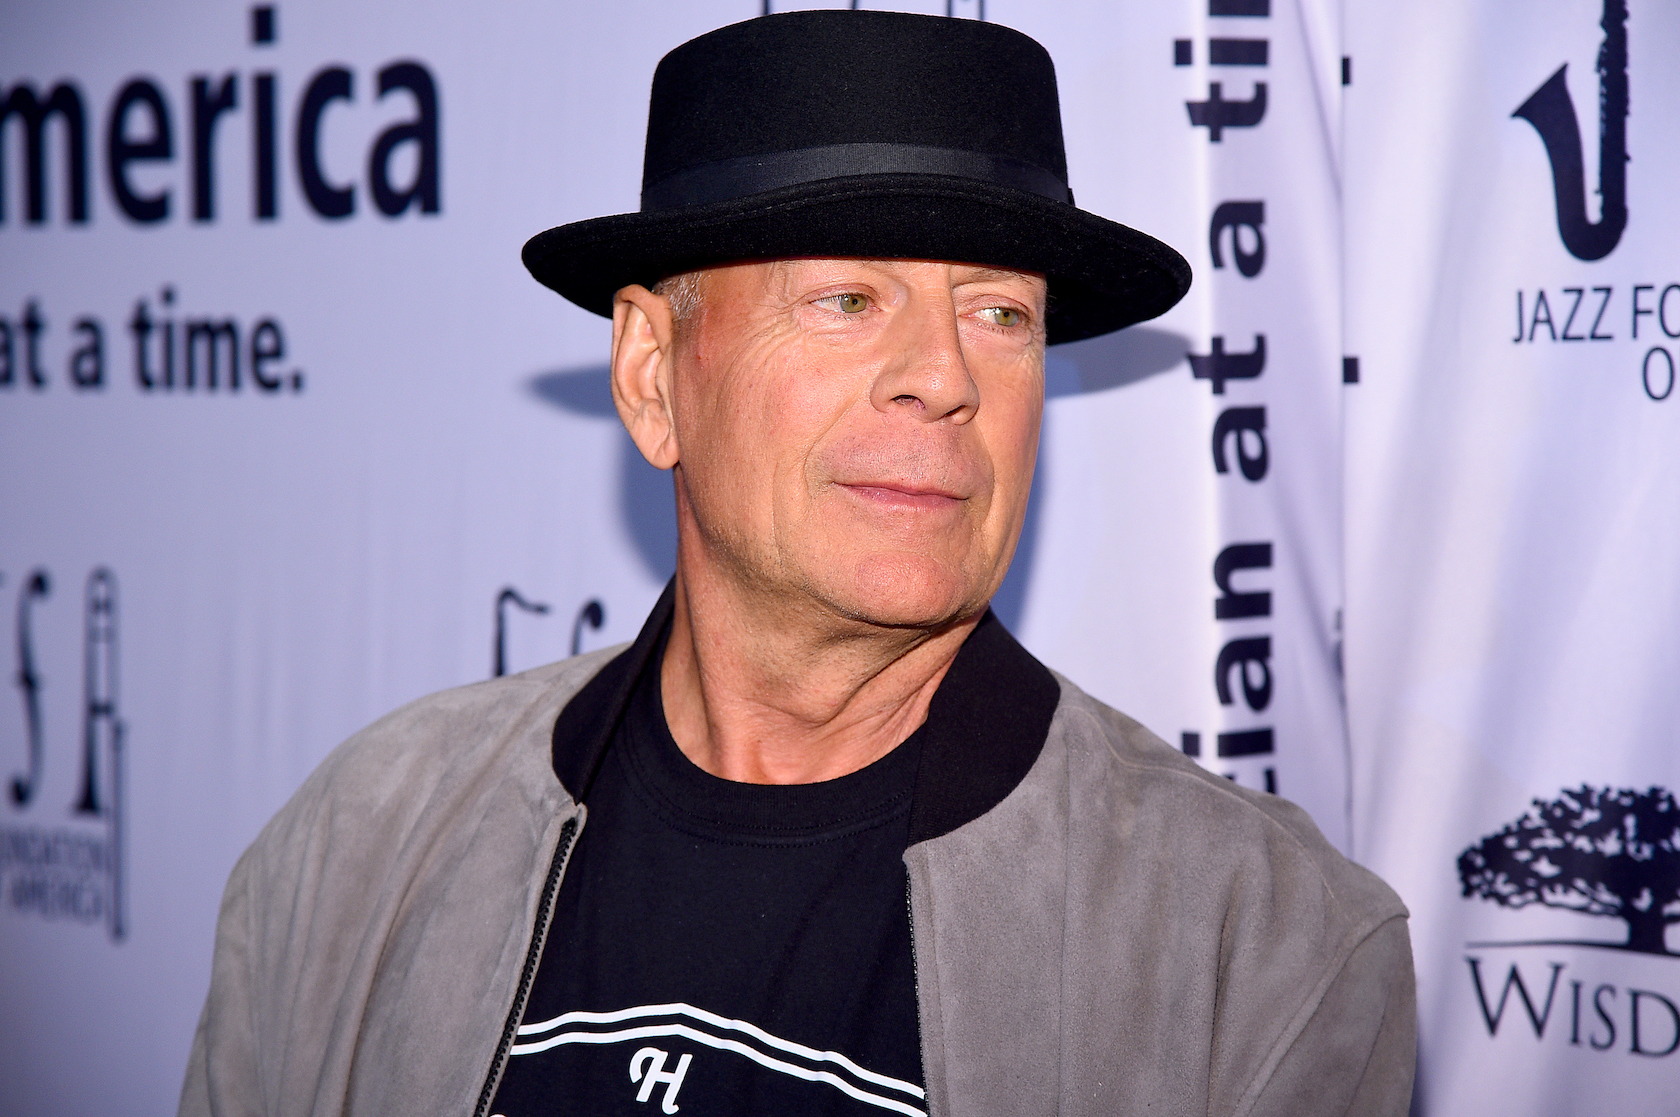 Bruce Willis in a black hat looking over his shoulder against a purple background. Bruce Willis is leaving Hollywood due to aphasia